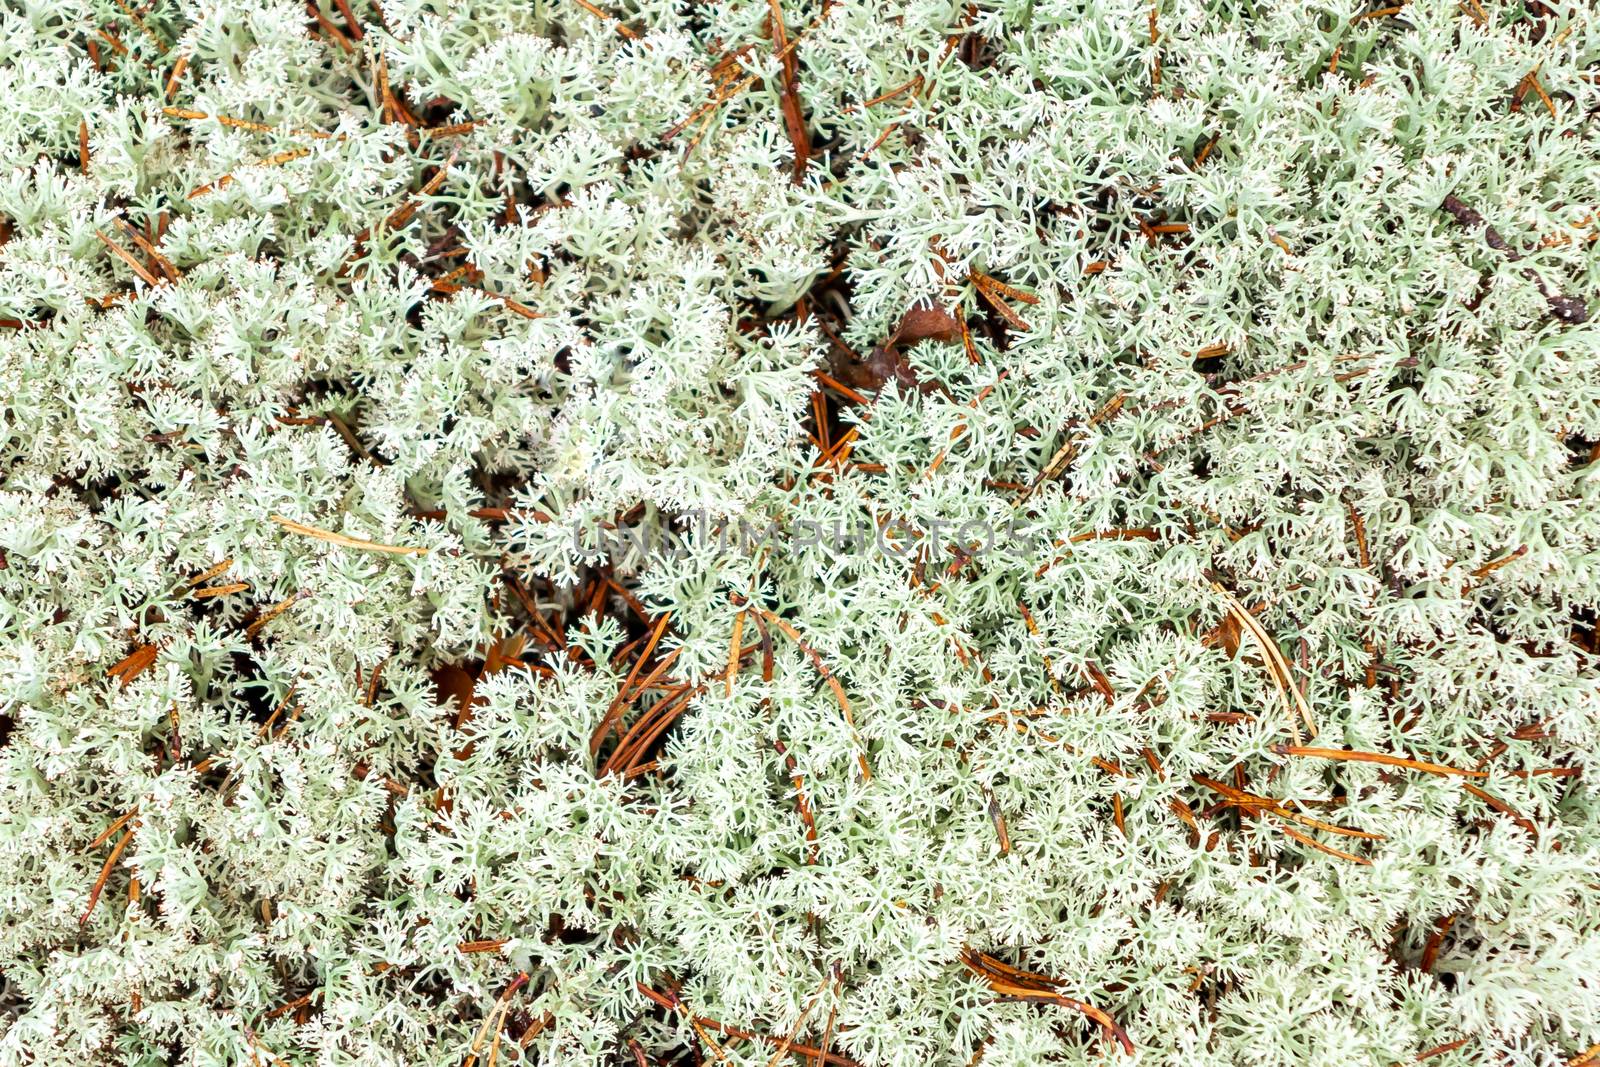 Texture of the forest floor - reindeer moss and pine needles.